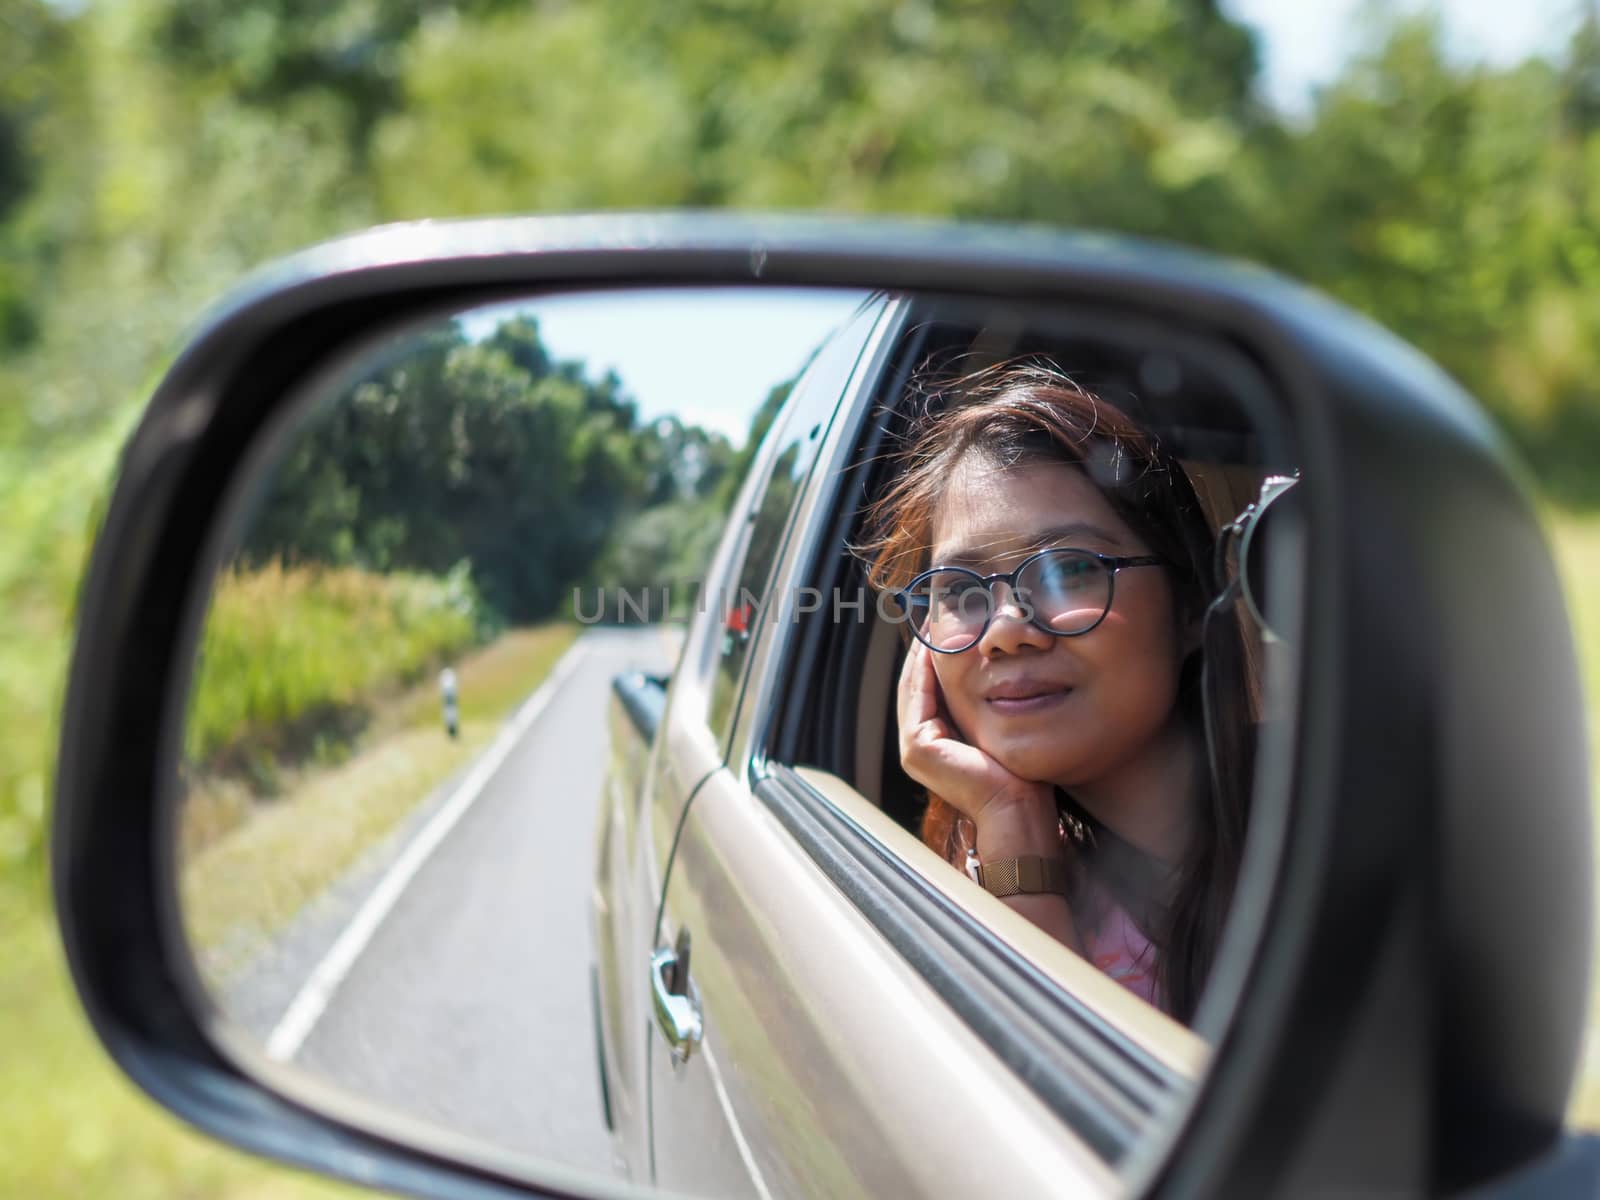 A woman's side-view mirror looking out of the car While driving  by Unimages2527